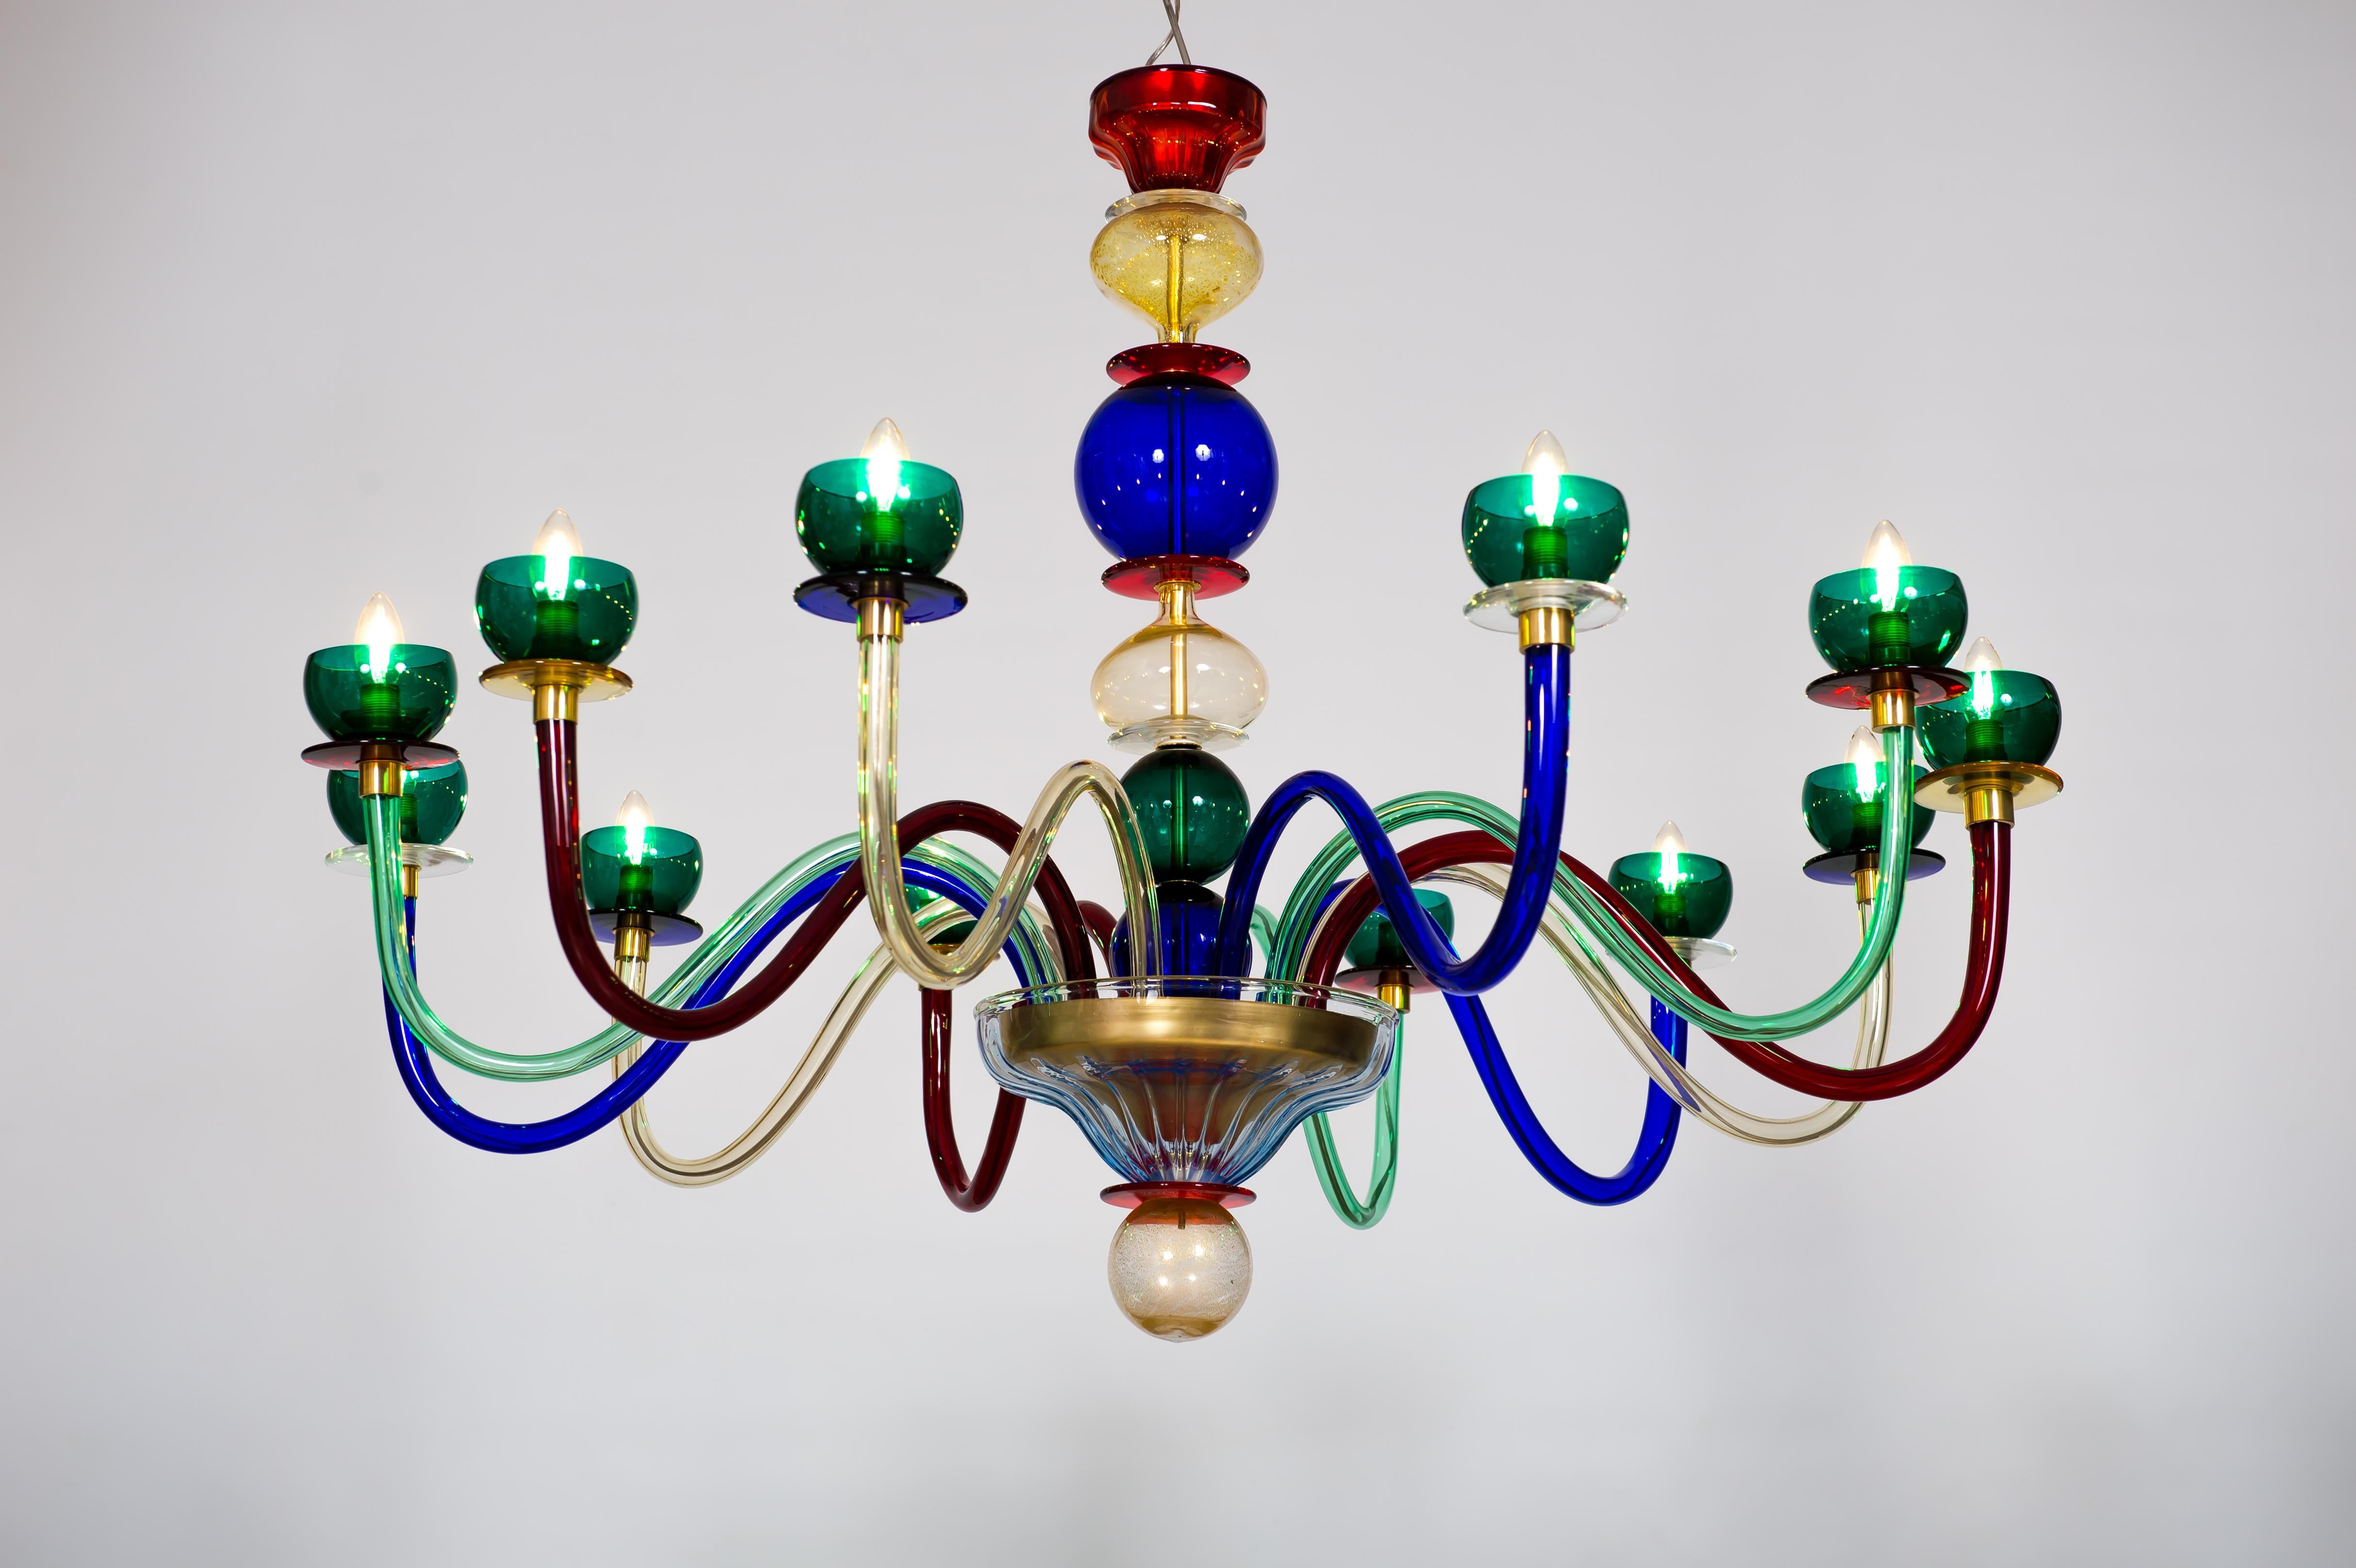 Italian Venetian Multicolor Murano glass chandelier by Giovanni Dalla Fina 2010s.
This amazing chandelier stands out for the beauty of its design and the quality of its materials. It is not just a functional object but a true piece of Italian art.